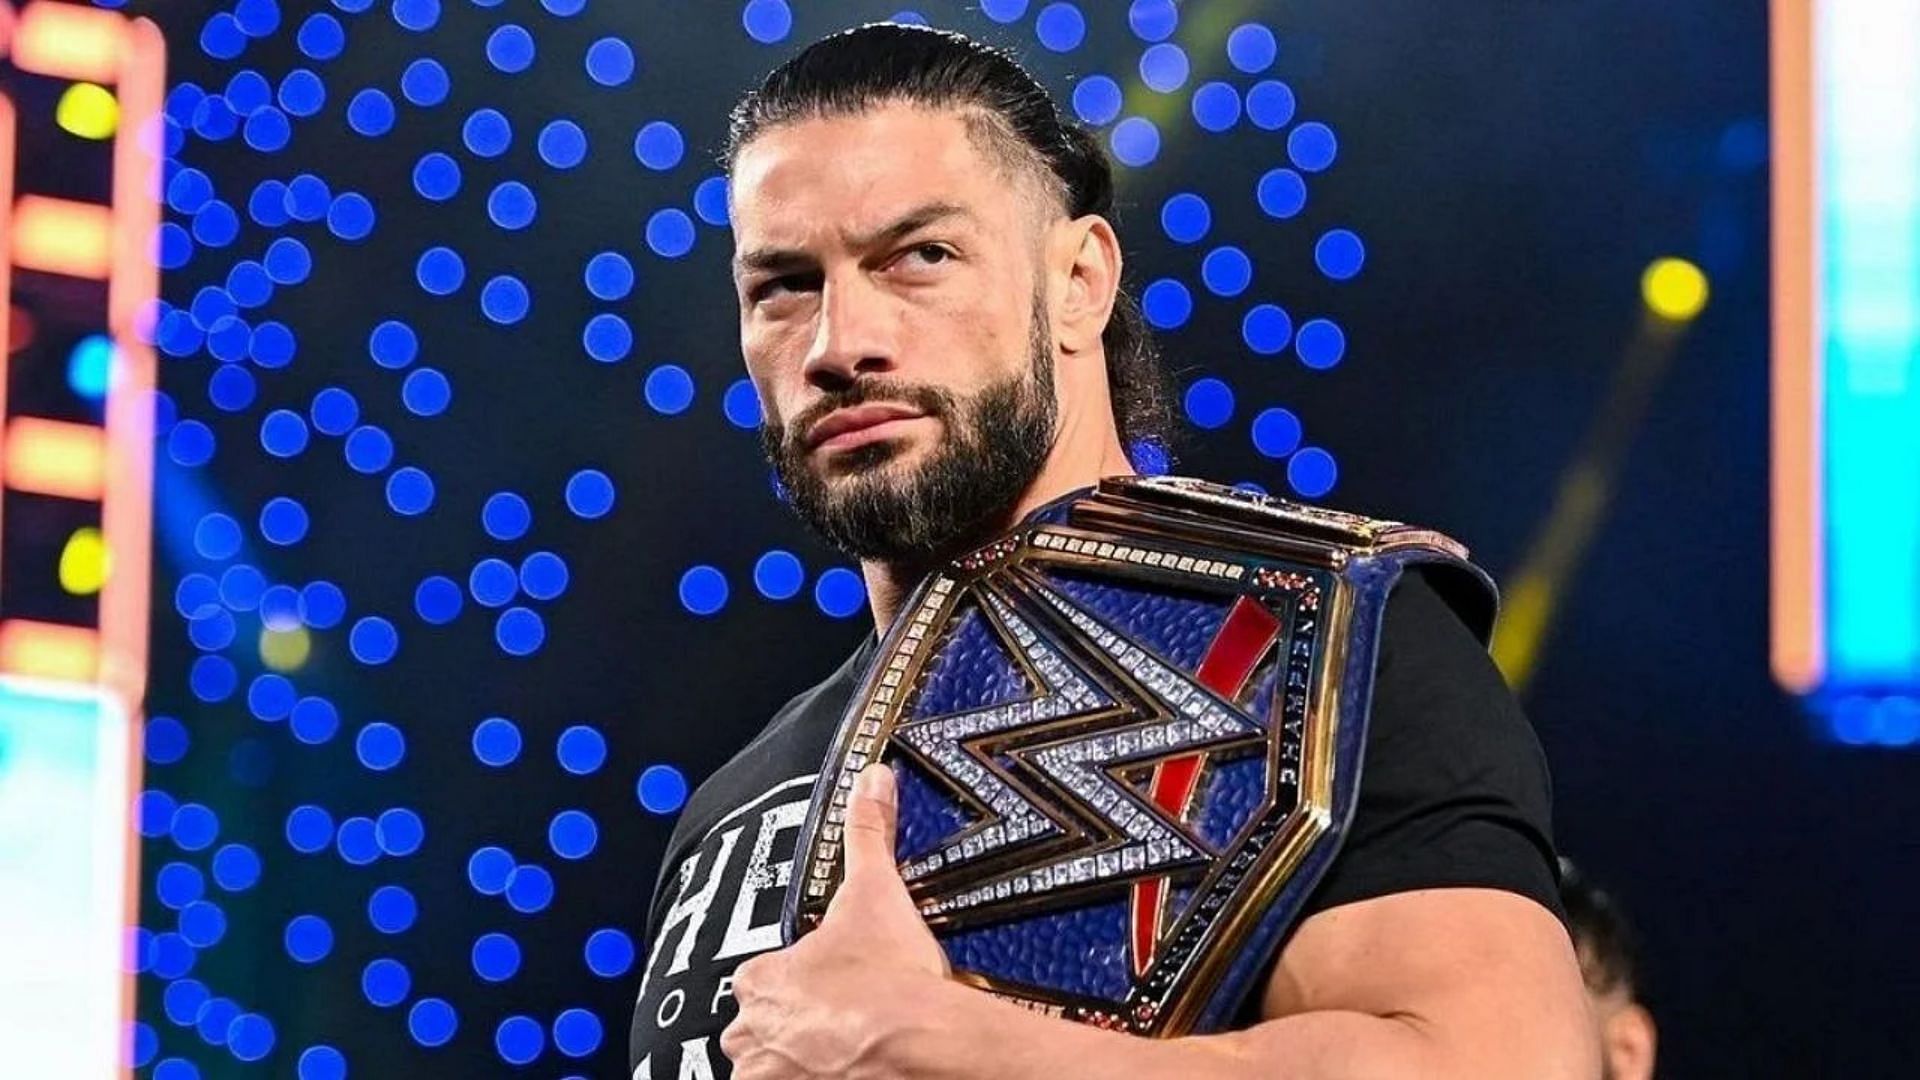 Roman Reigns was originally slated to wrestle a former rival in the recent past...